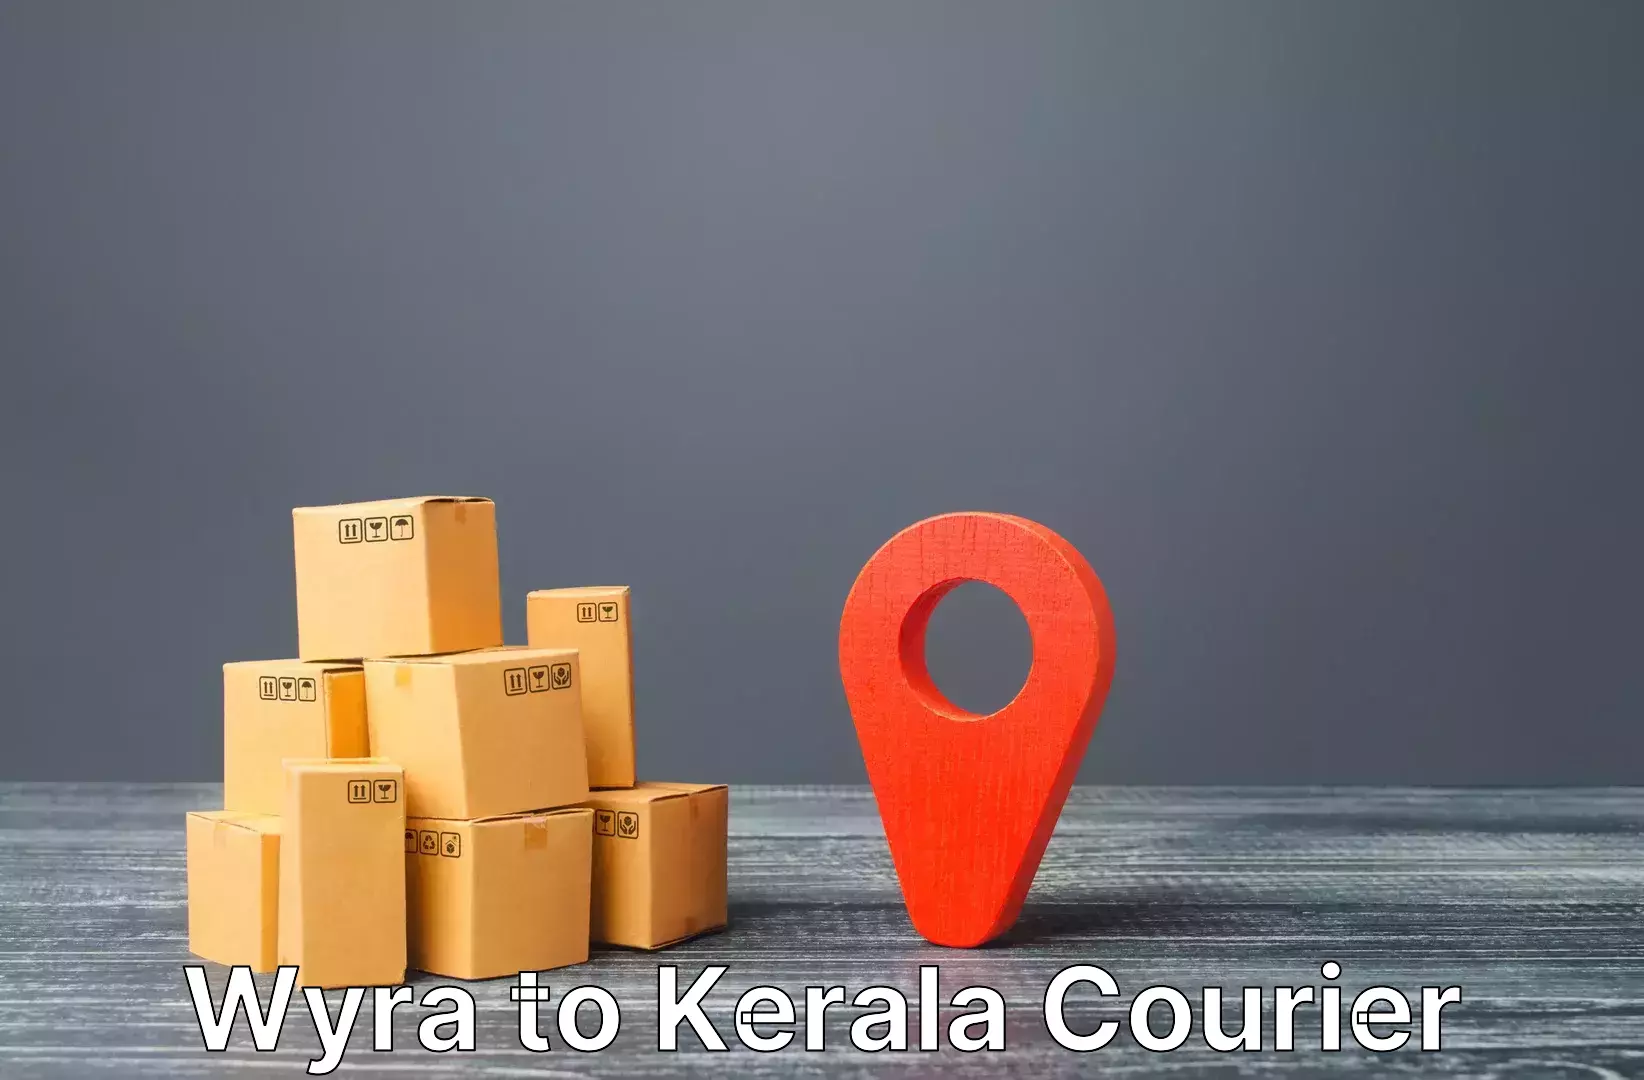 Luggage delivery news in Wyra to Kerala